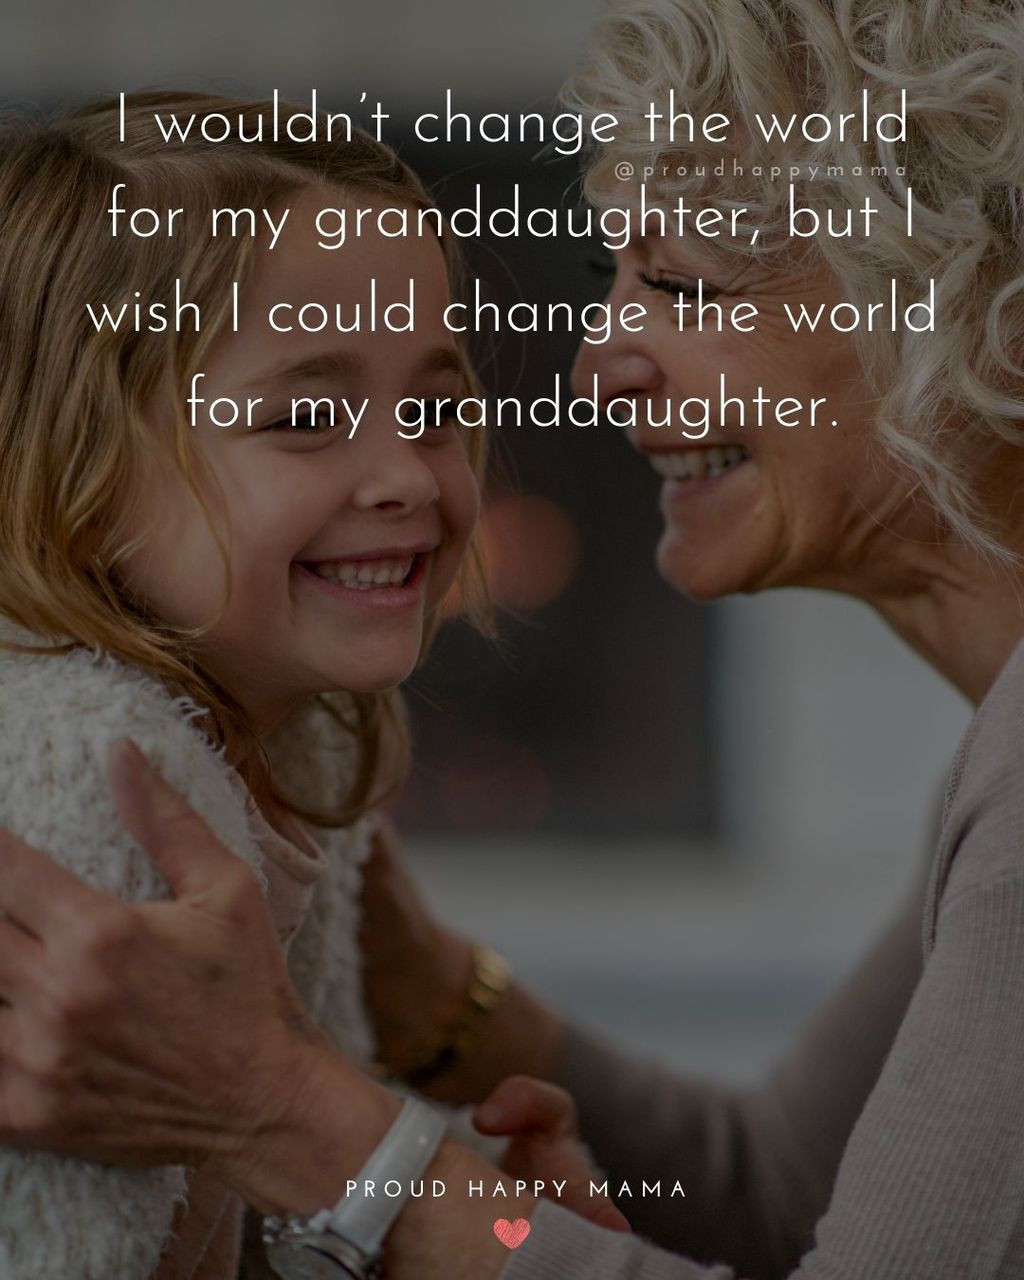 Grandmother looking loving at granddaughter with granddaughter smiling. To my granddaughter quote text overlay, ‘I wouldn’t change the world for my granddaughter, but I wish I could change the world for my granddaughter.’